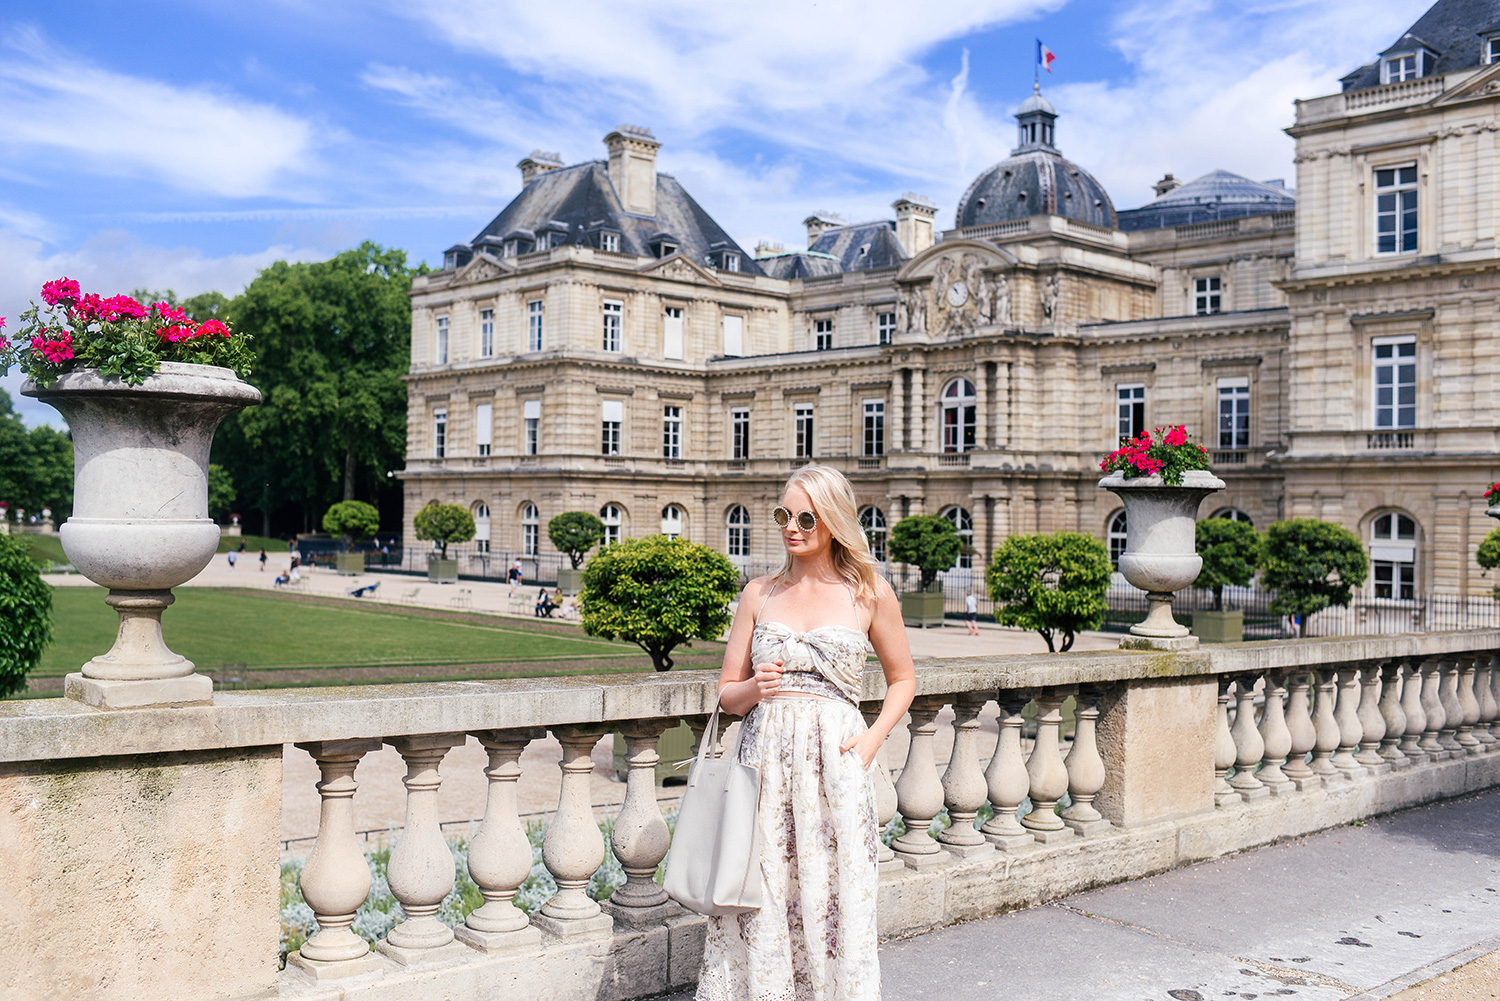 Zimmermann Iris Picnic Dress at the Jardin du Luxembourg in Paris | The Style Scribe